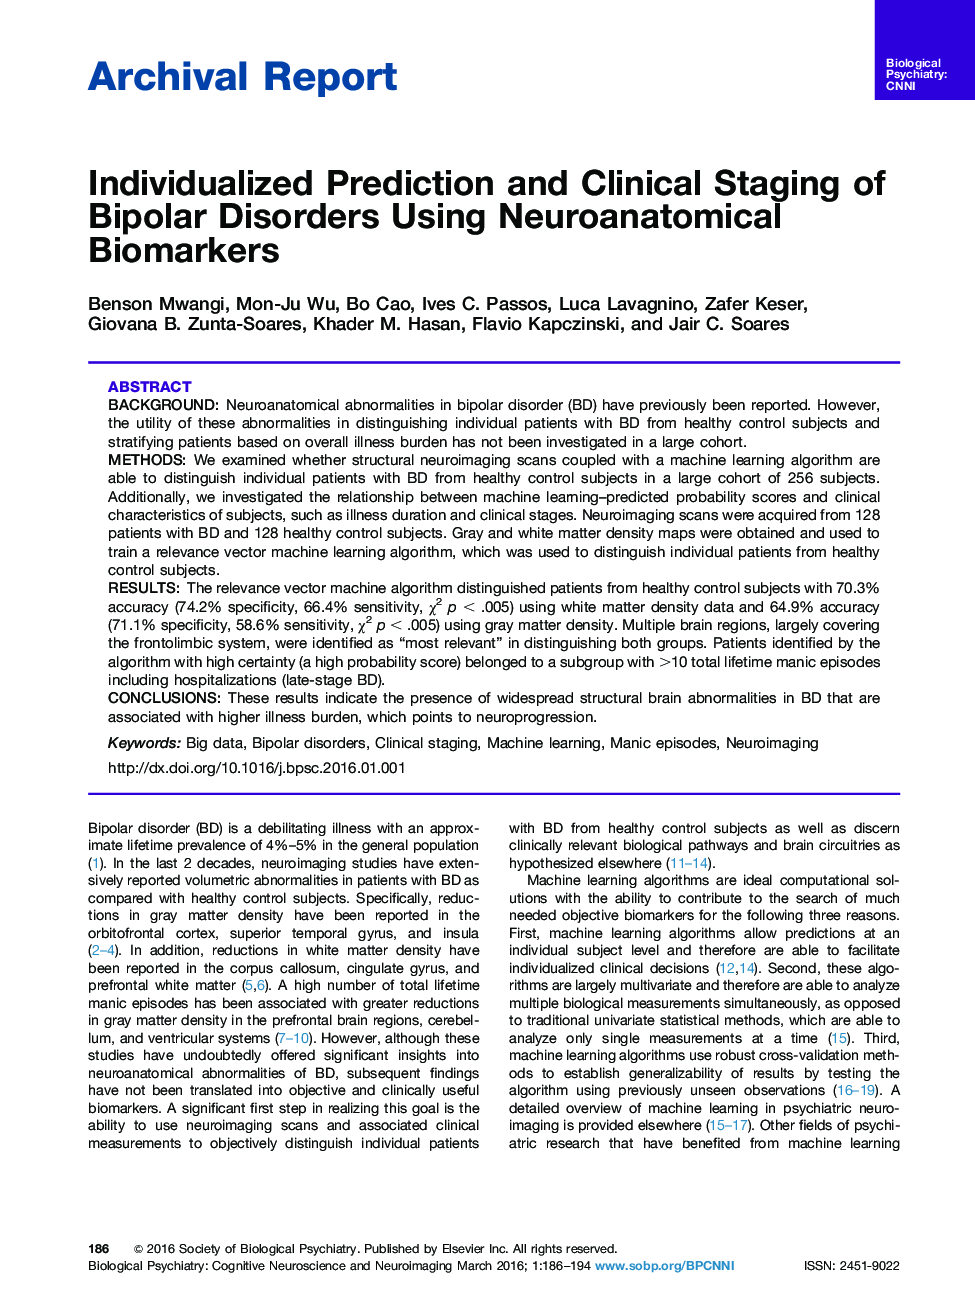 Individualized Prediction and Clinical Staging of Bipolar Disorders Using Neuroanatomical Biomarkers